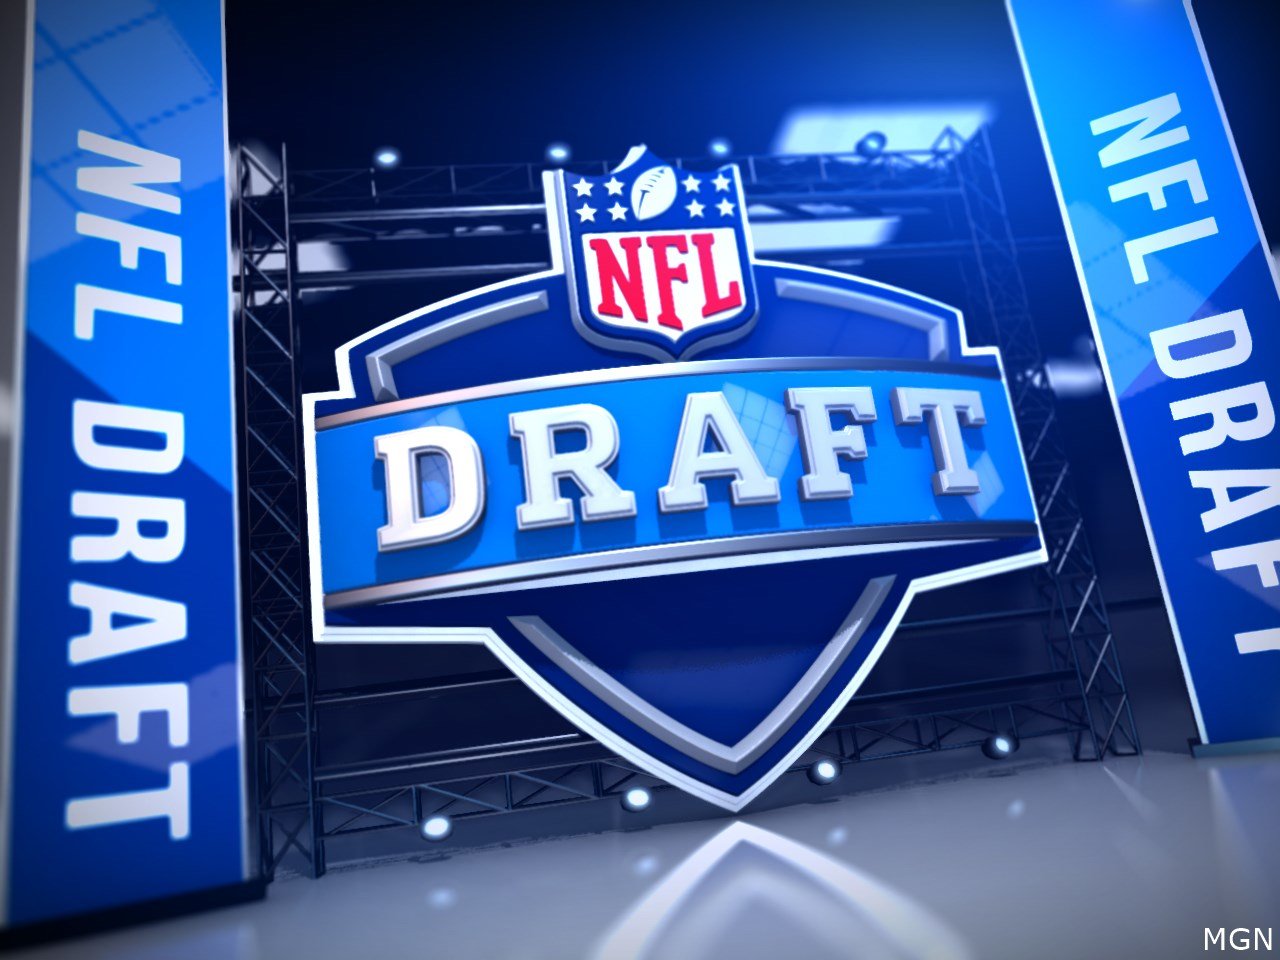 NFL Draft Guide: How to watch, who will go No. 1